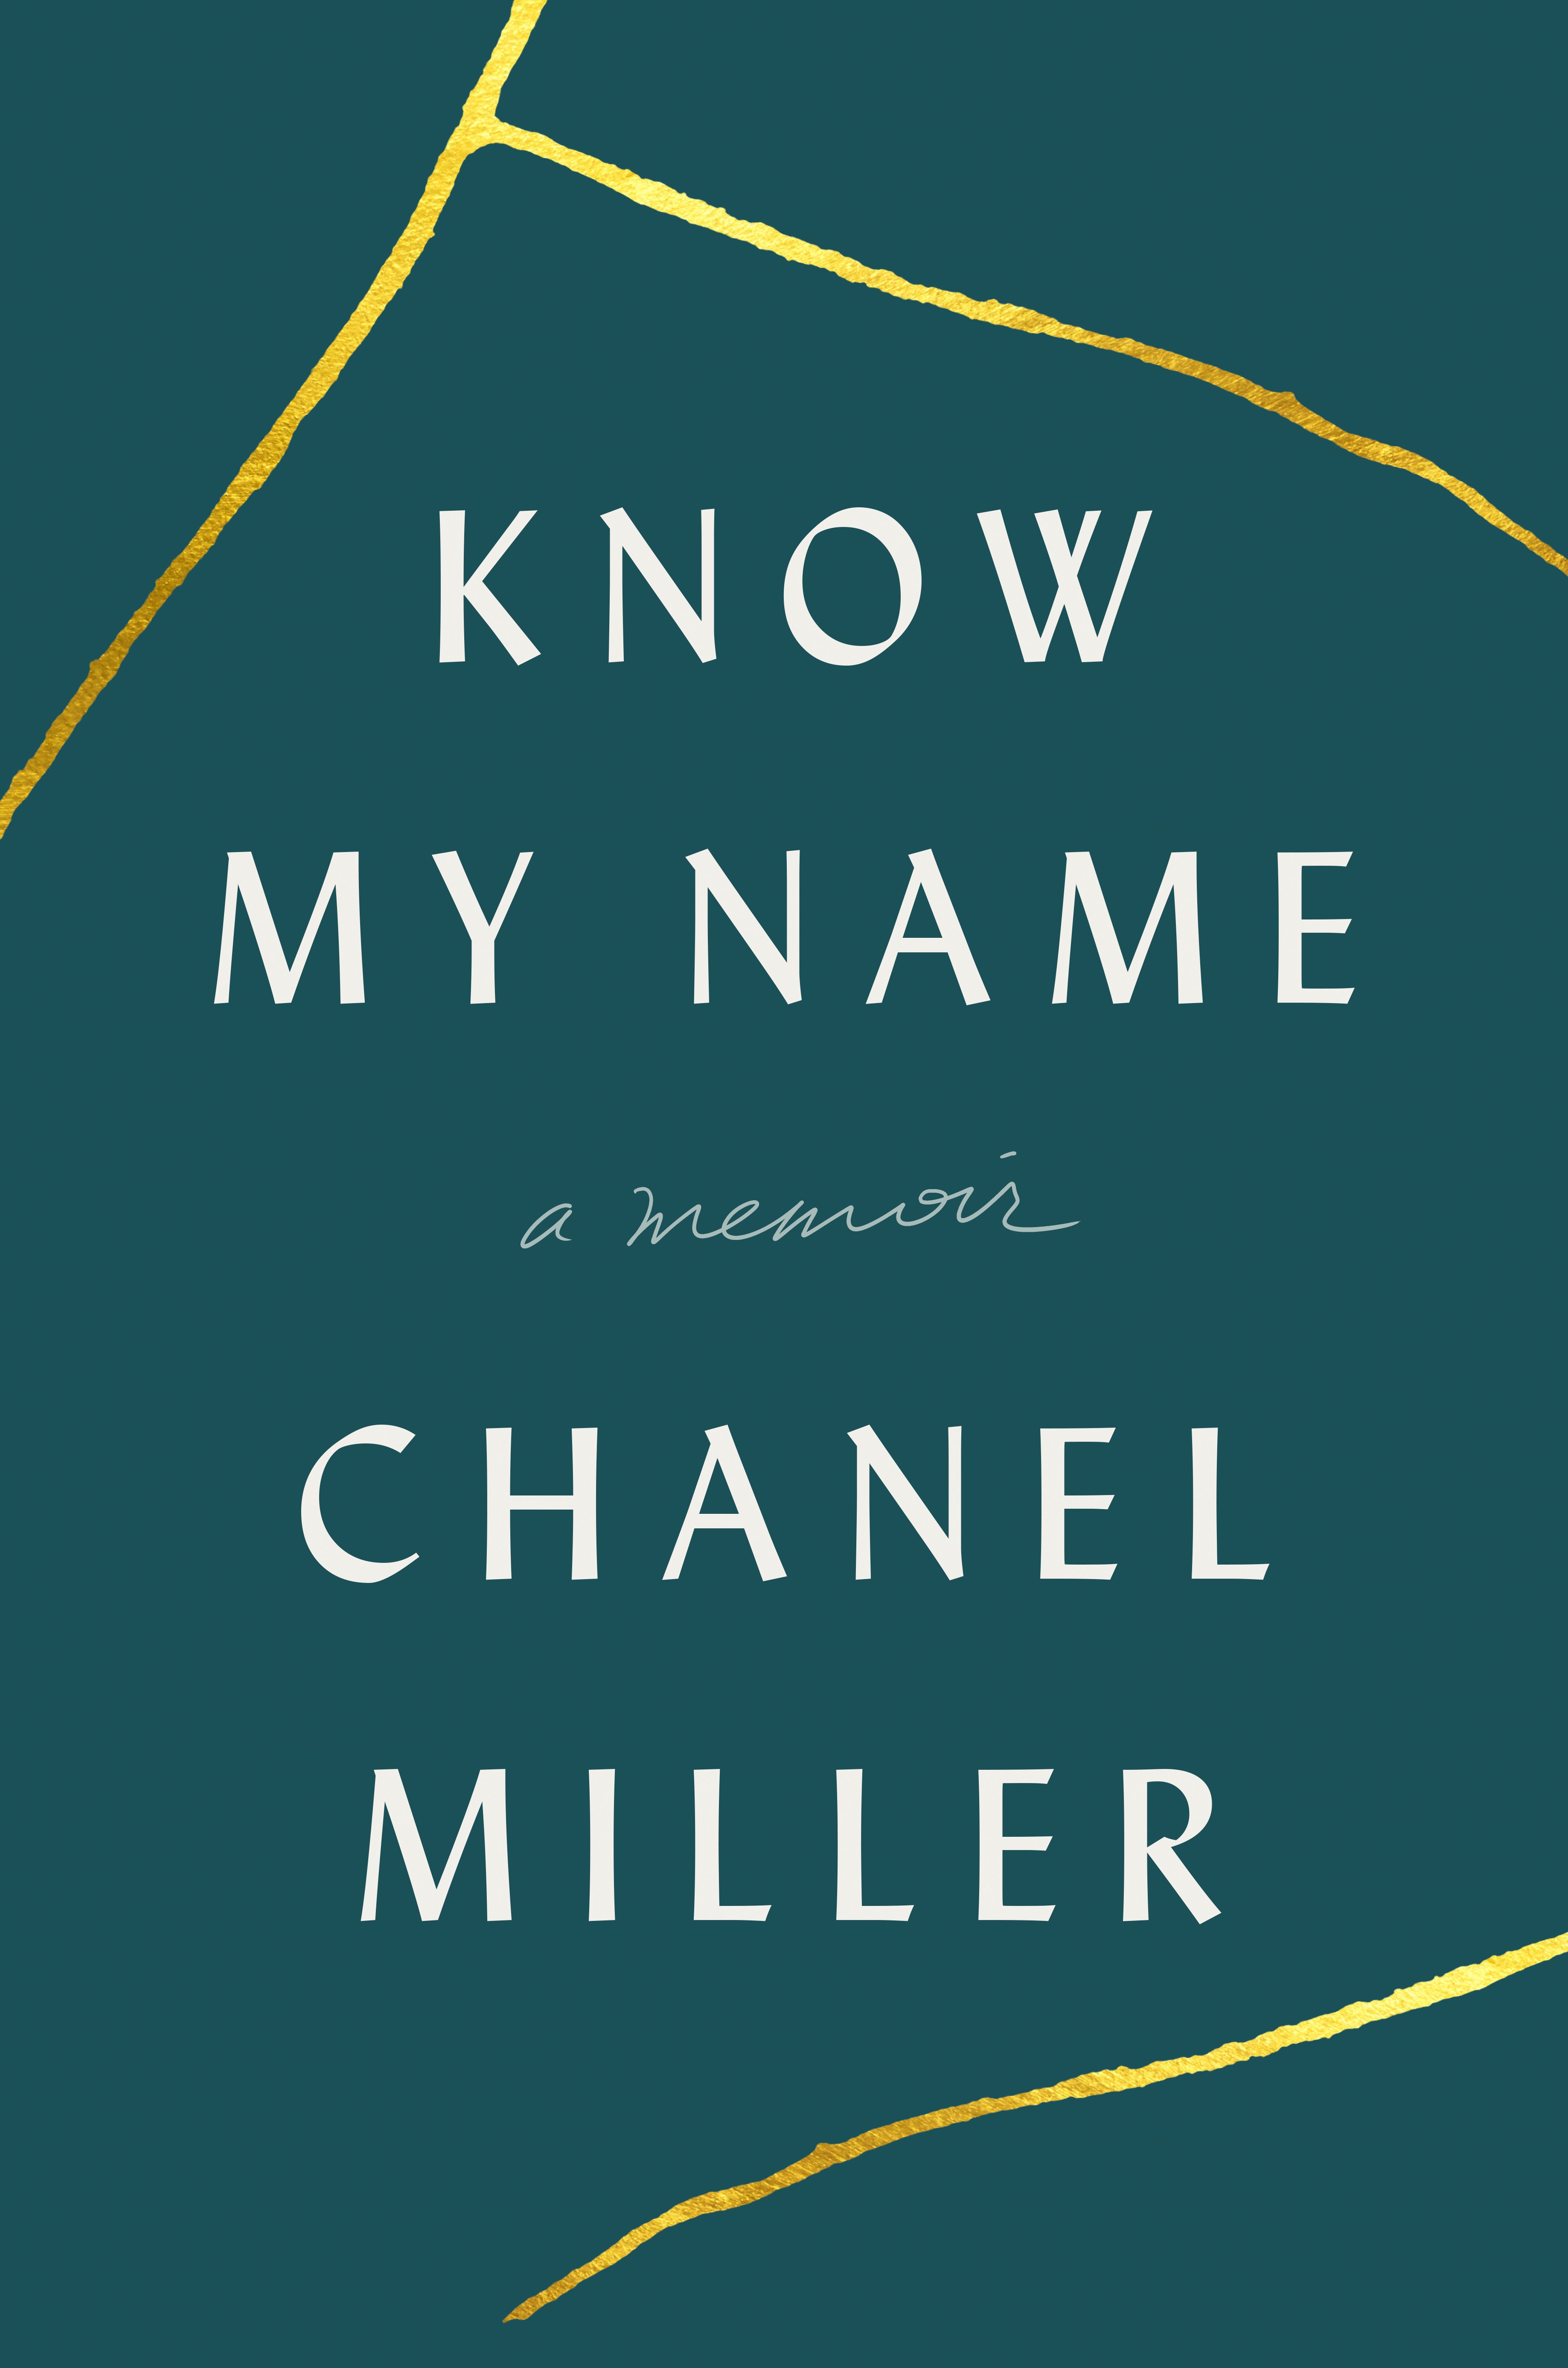 Book cover of "Know My Name"